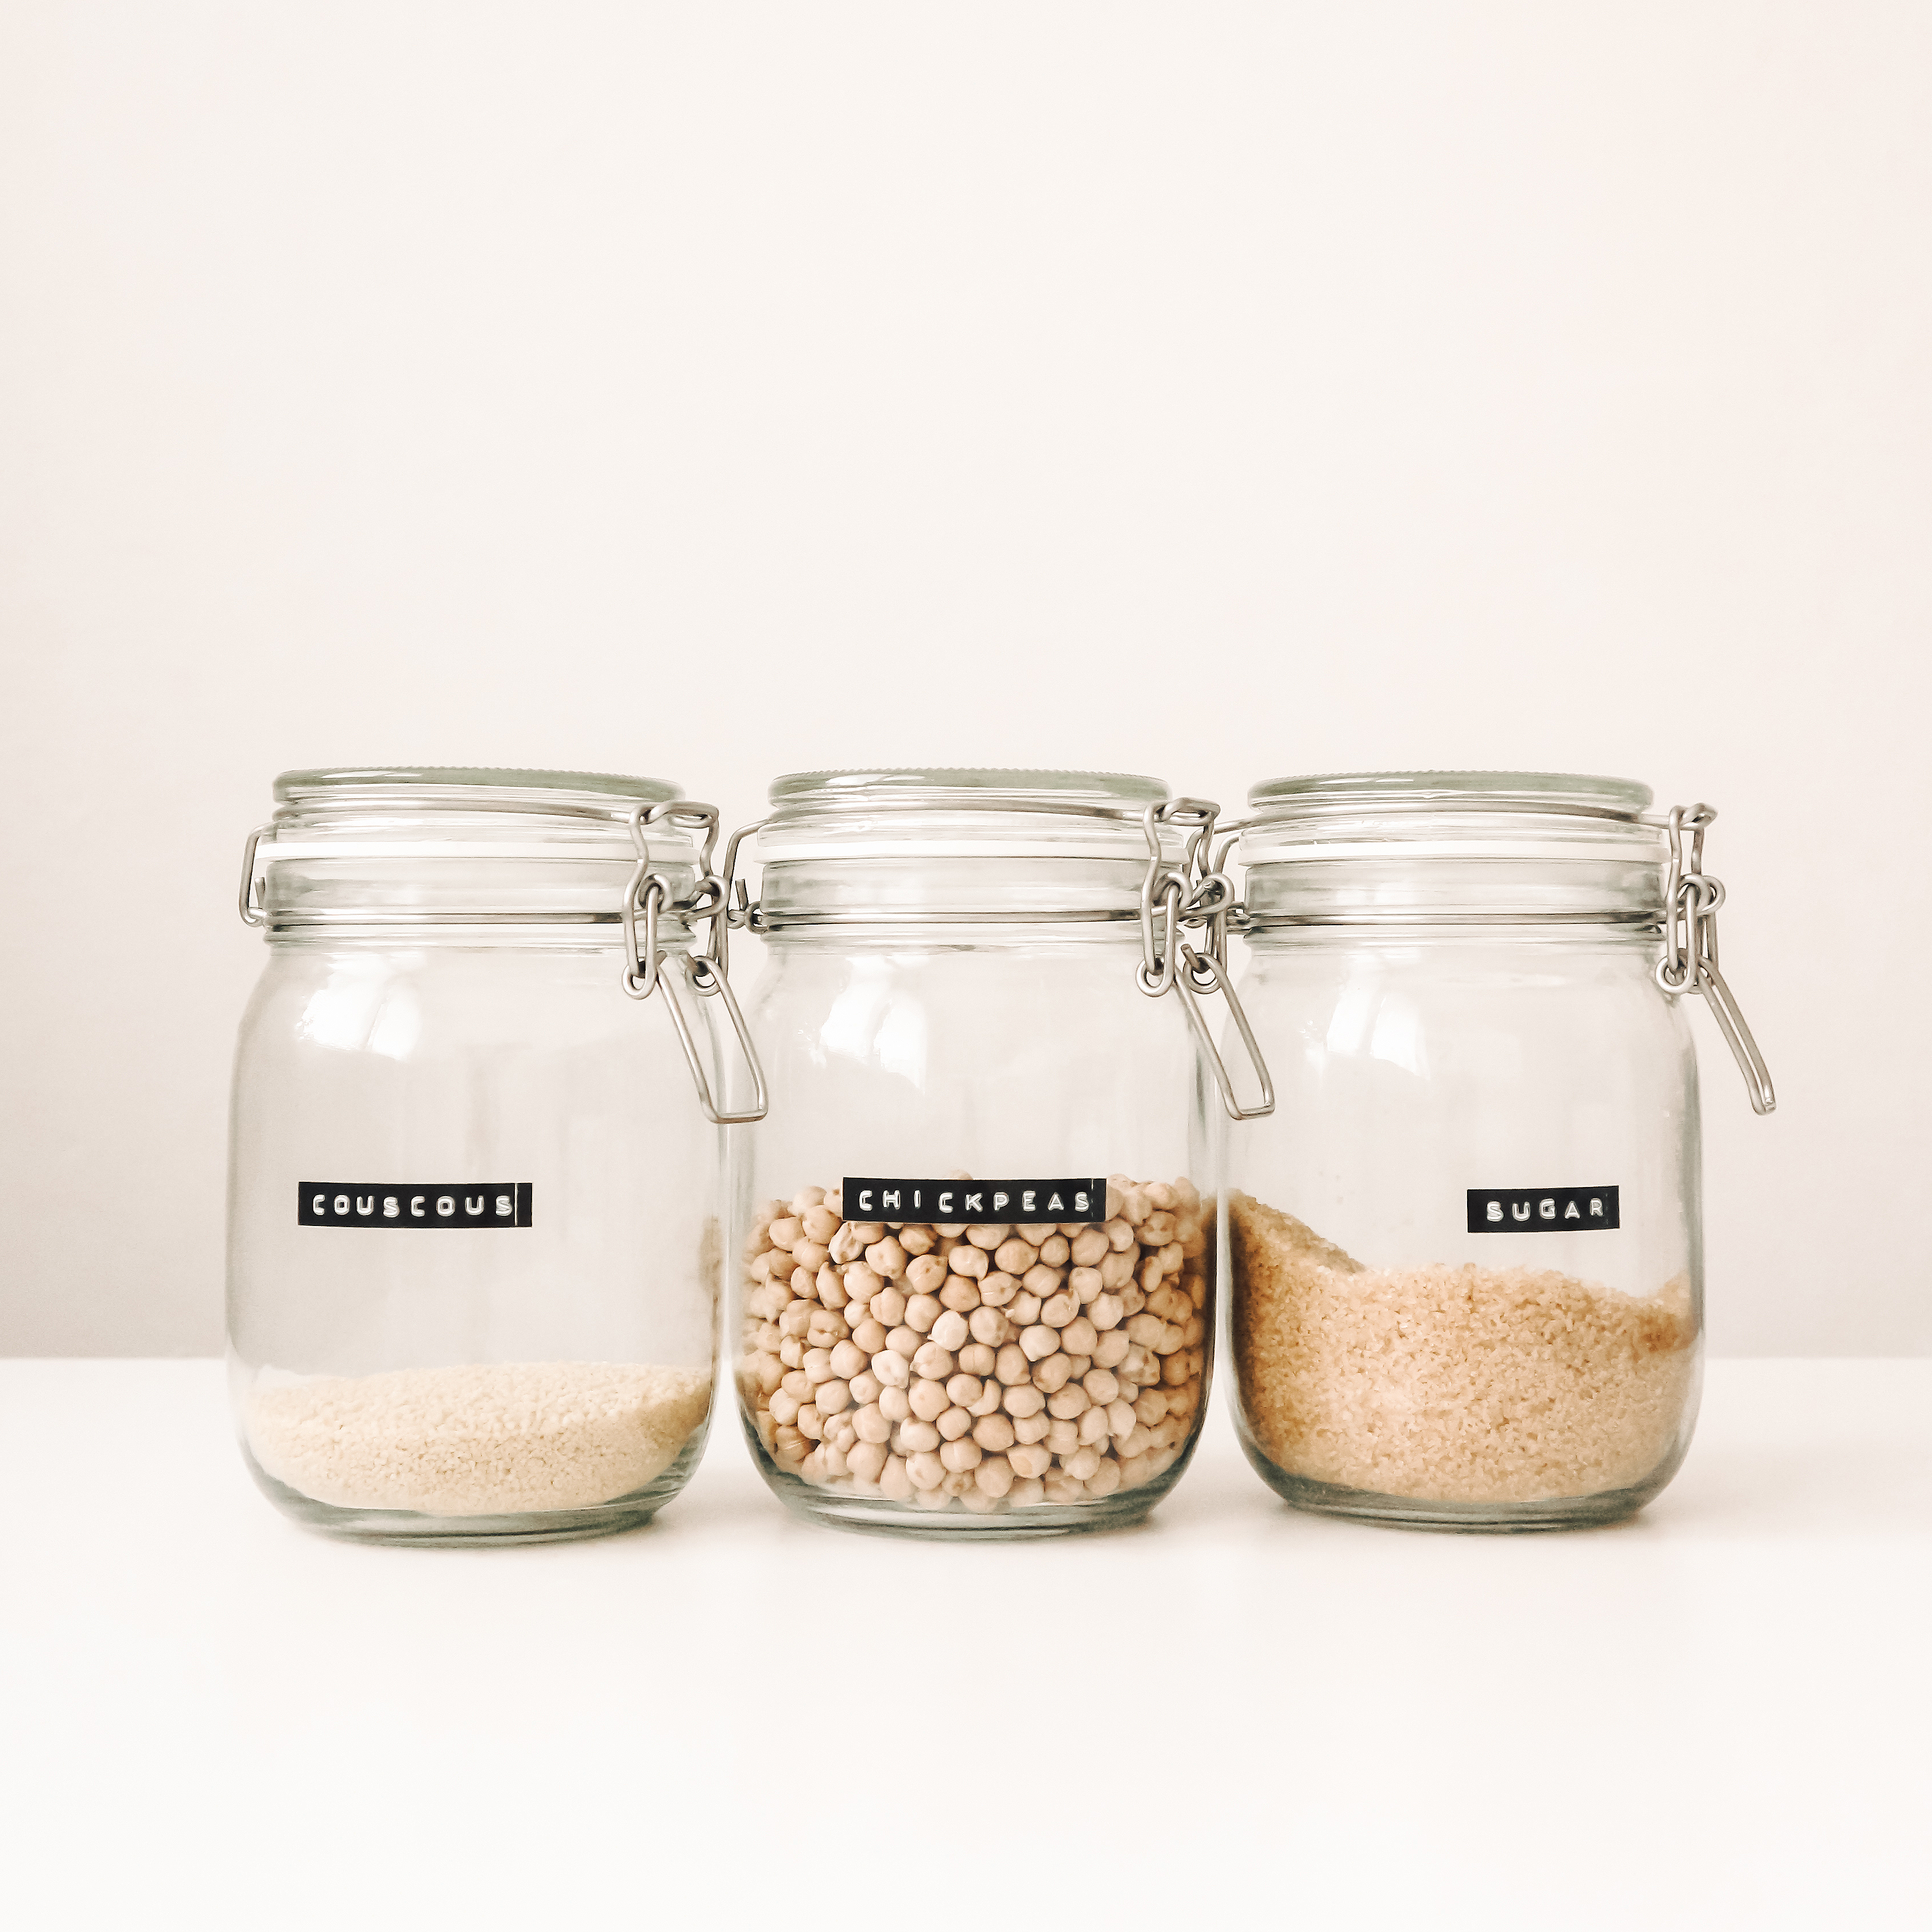 Glass food containers with couscous, chickpeas, and sugar.